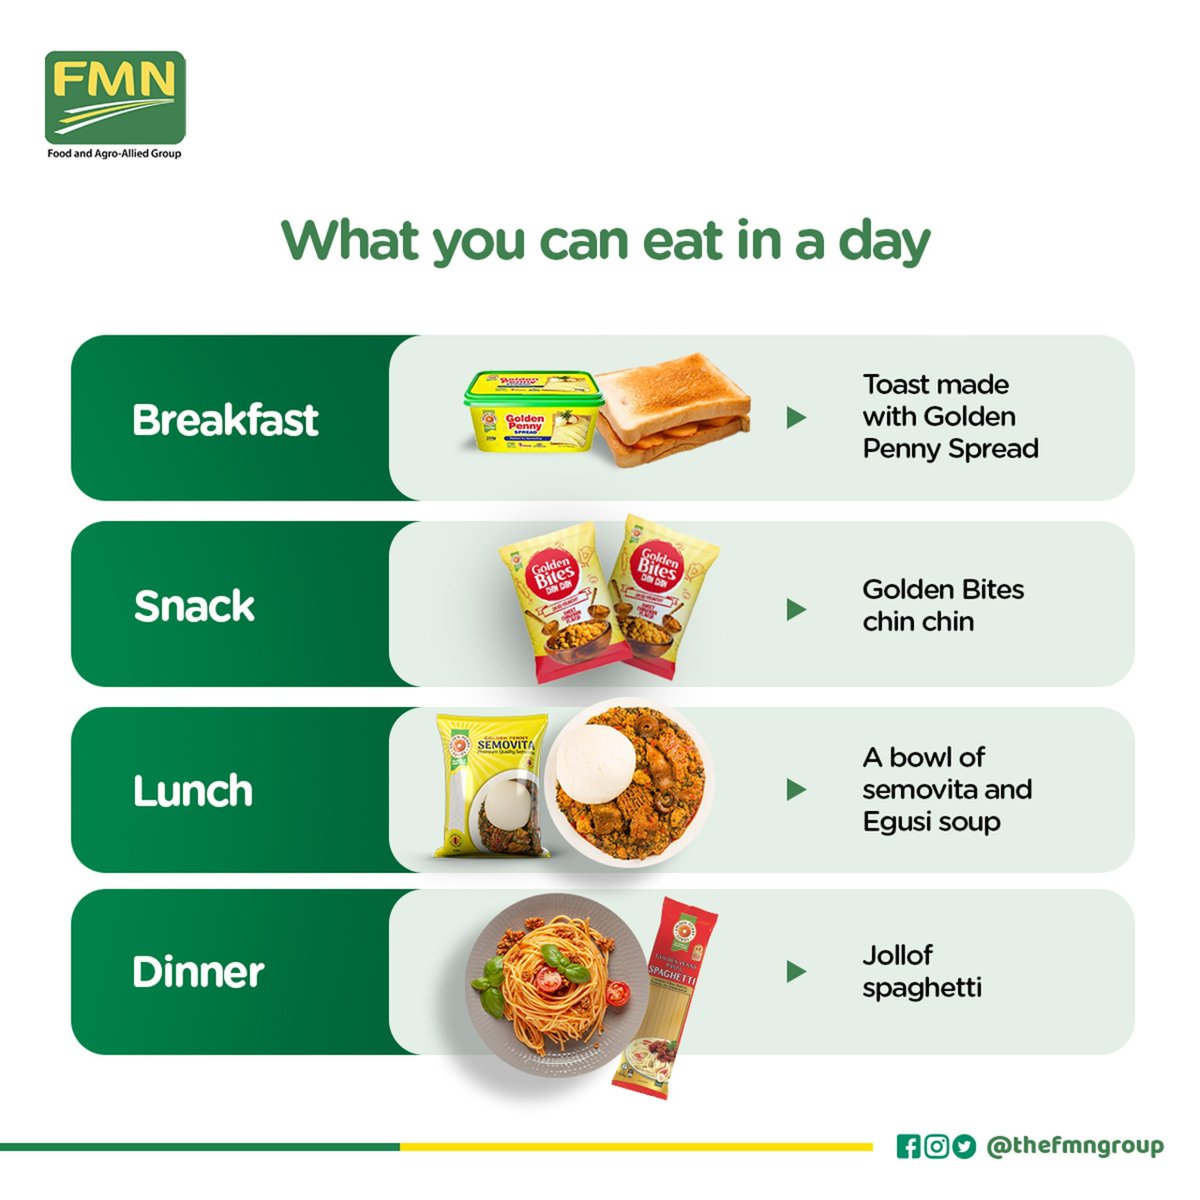 Dear content creator, we saved you the stress.

Here is a perfect meal plan for your next 'What I eat in a day' video.

Enjoy!!!

#adayinmylife #ContentCreation #Foodie #FMN